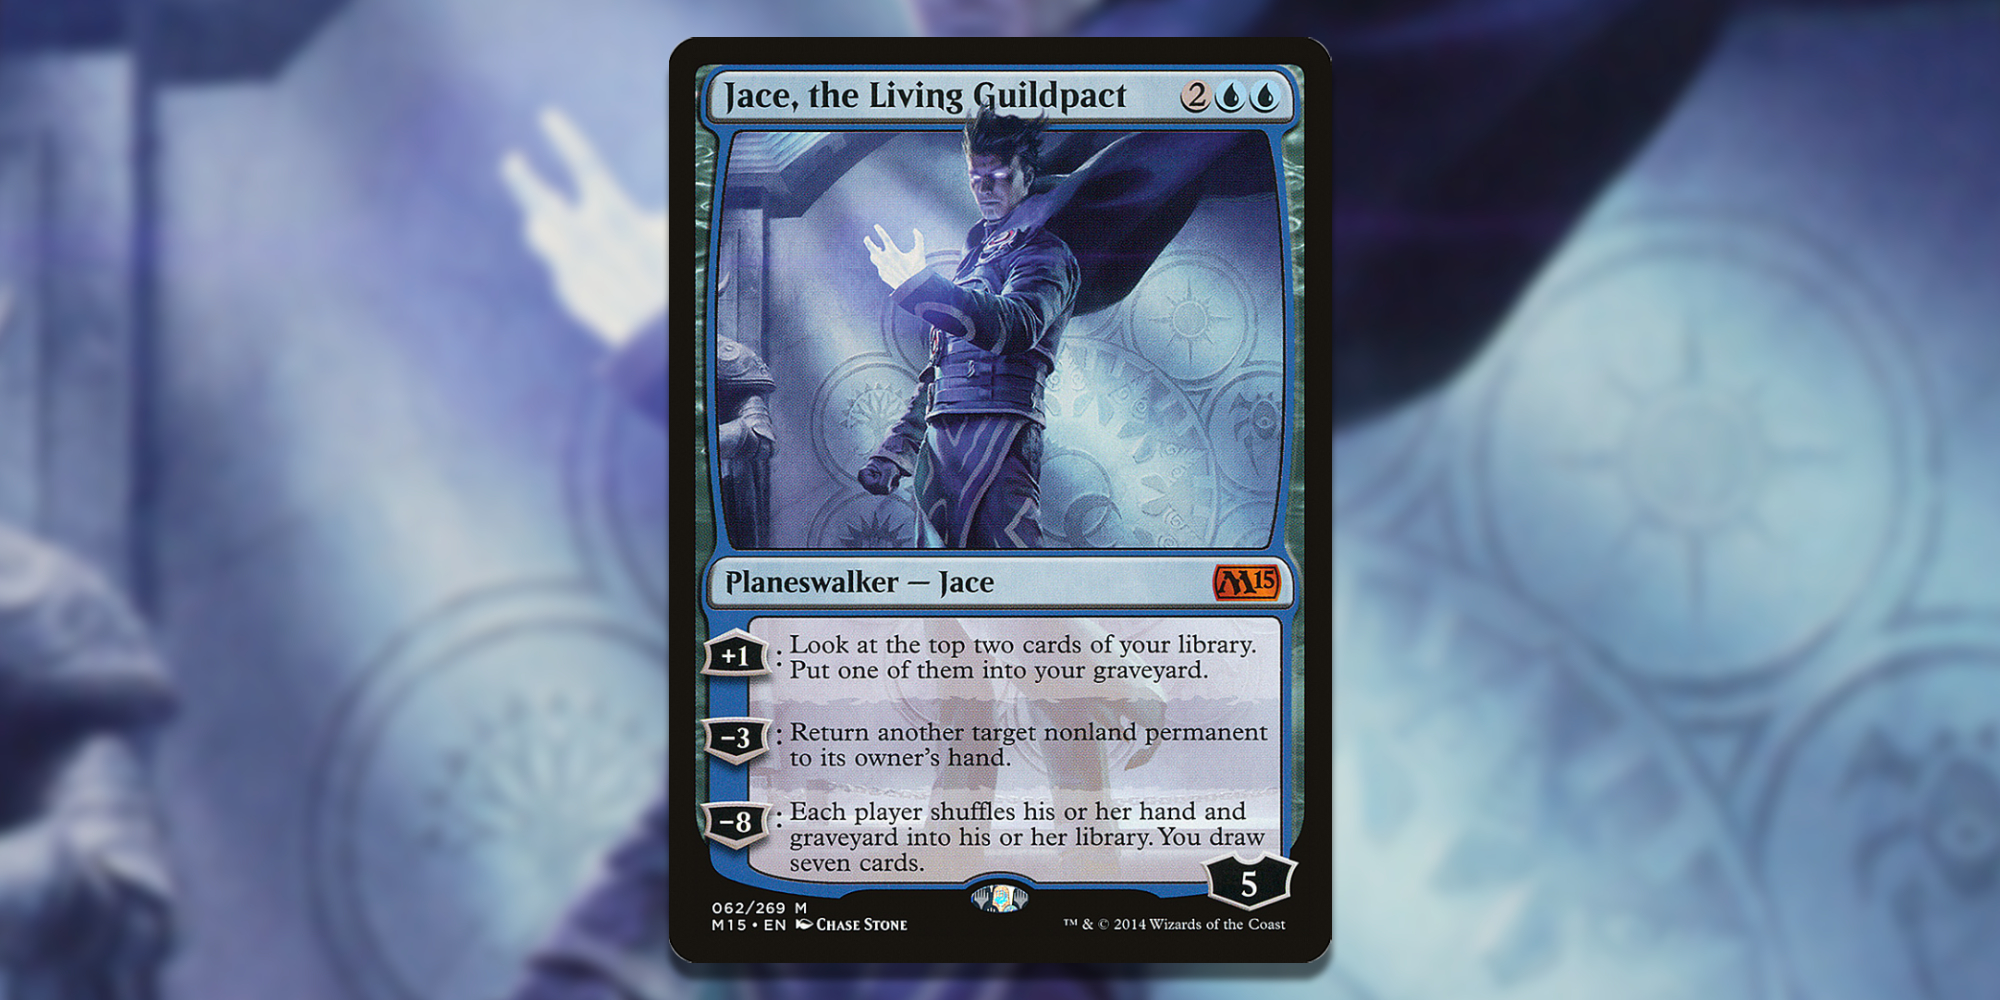 Card of Jace the Living Guildpact over Art Background